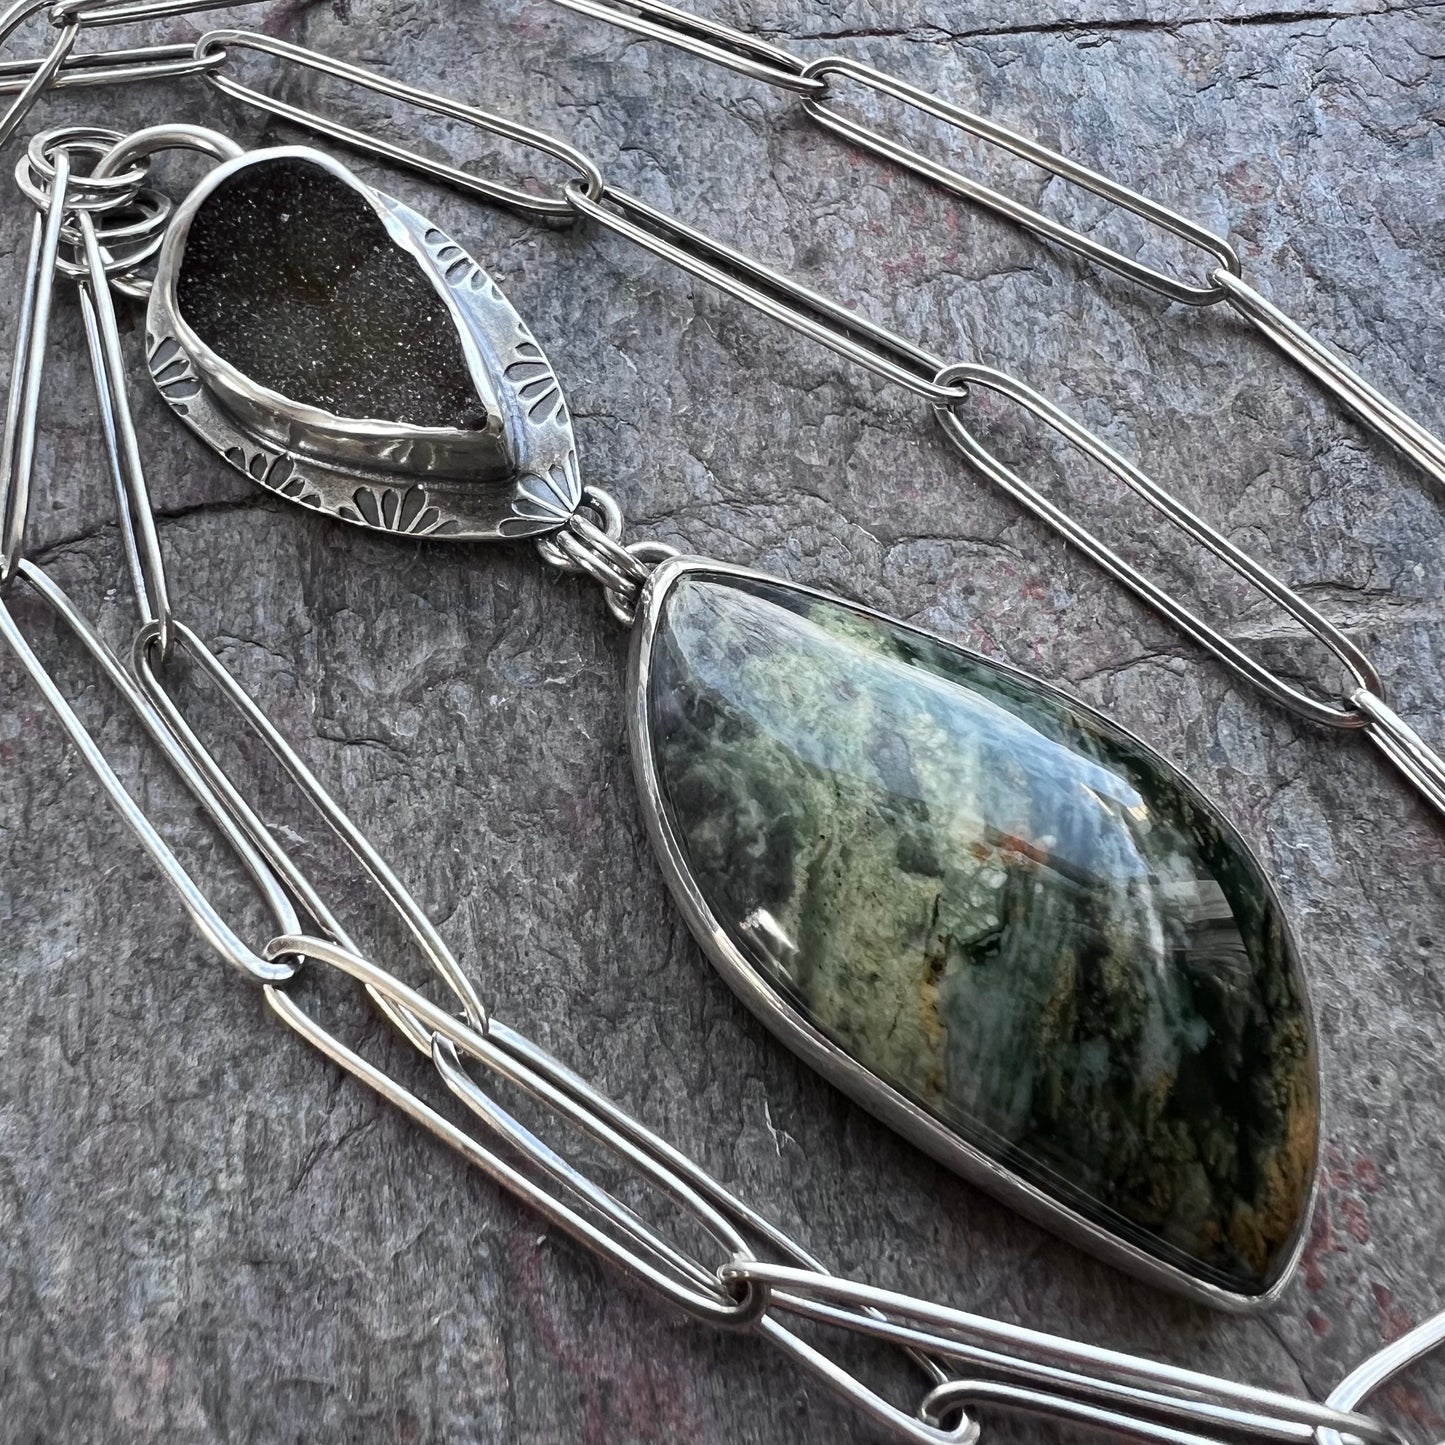 SOLD Sterling Silver Serpentine and Druzy Necklace - Handmade One-of-a-kind Pendant on Elongated Sterling Silver Chain